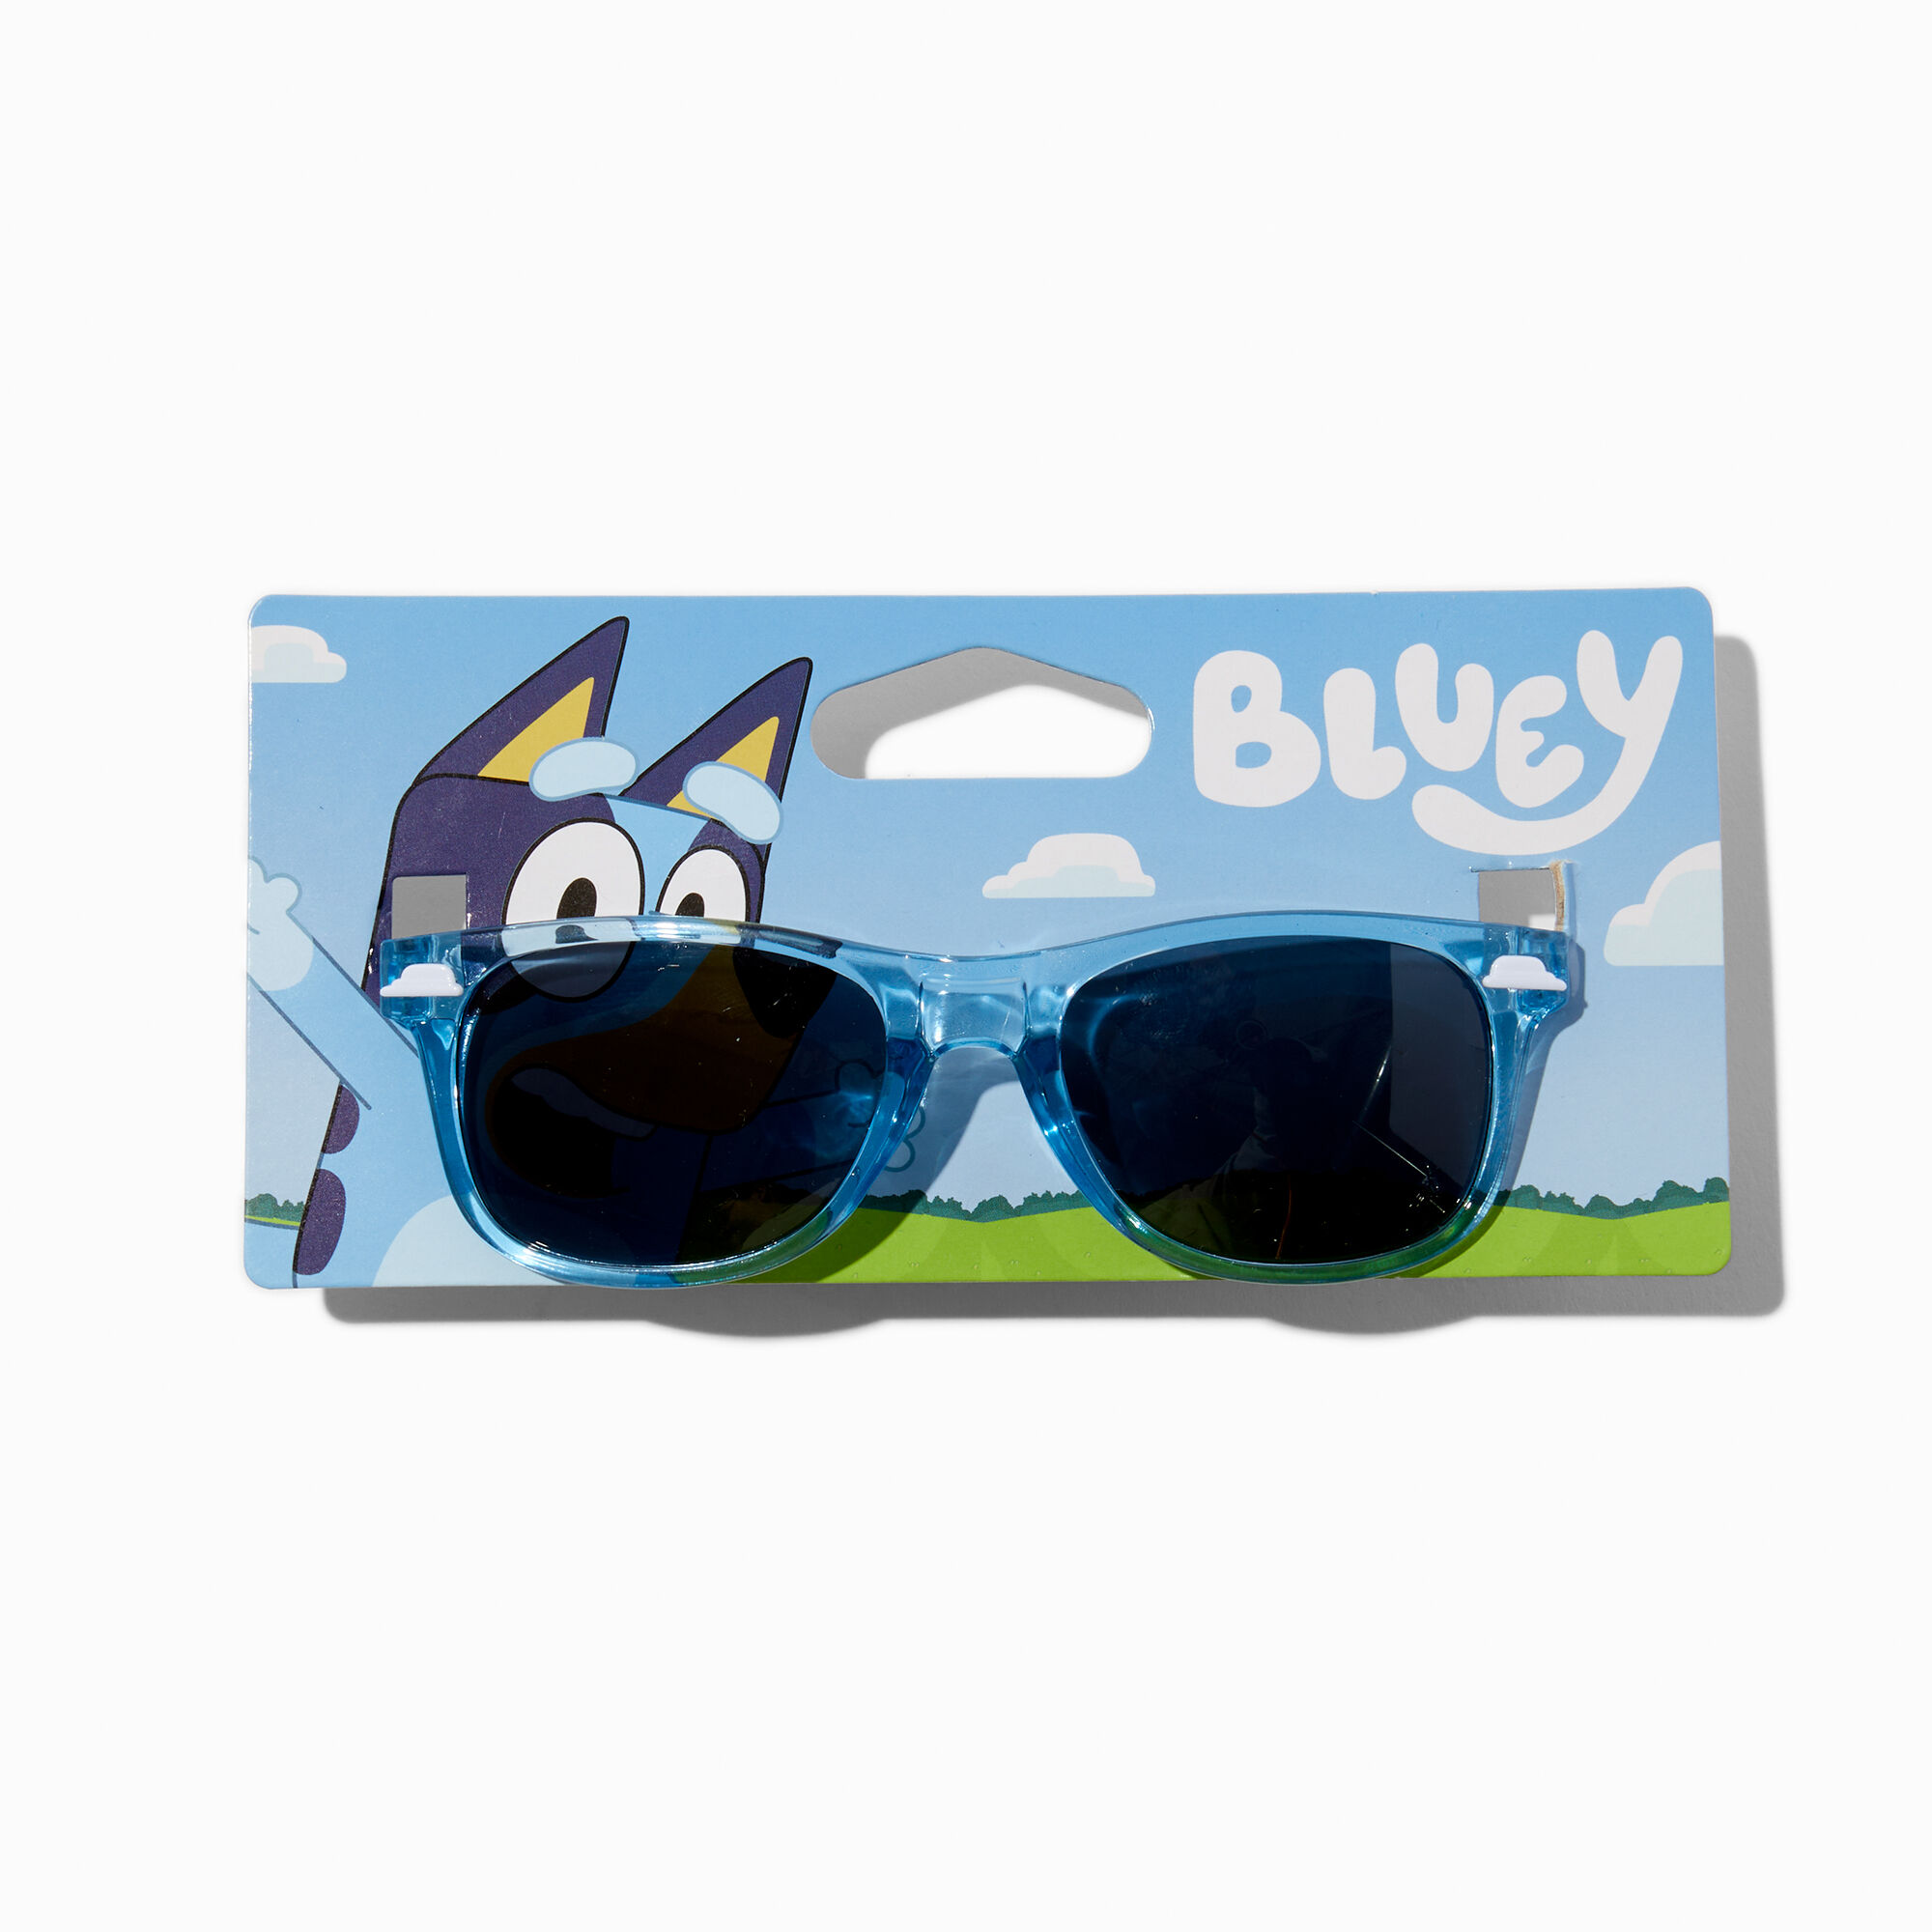 View Claires Bluey Sunglasses information